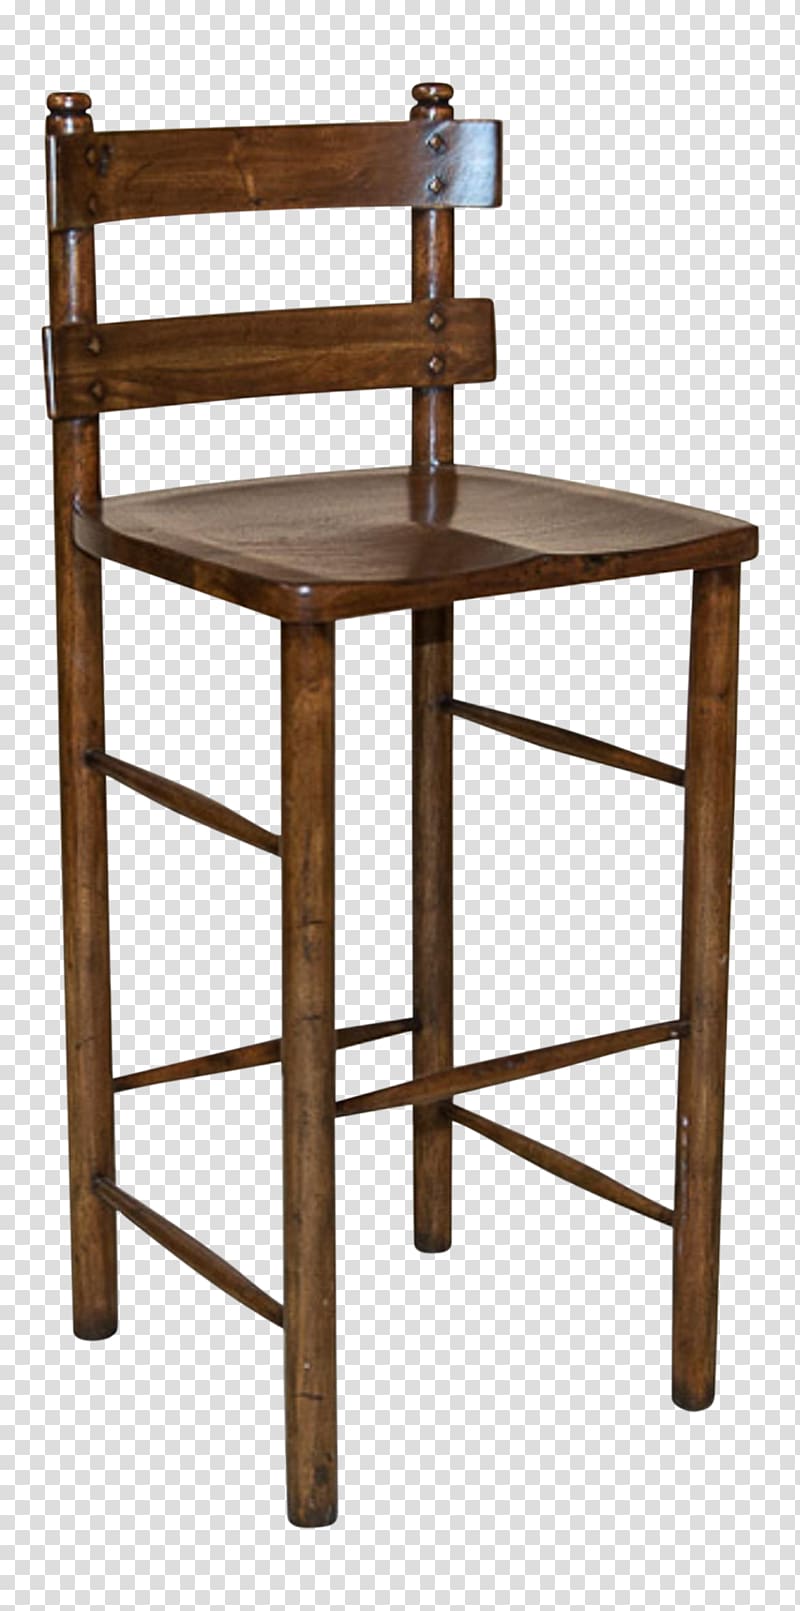 Bar stool Computer desk Cost Plus World Market Table, wooden stool transparent background PNG clipart